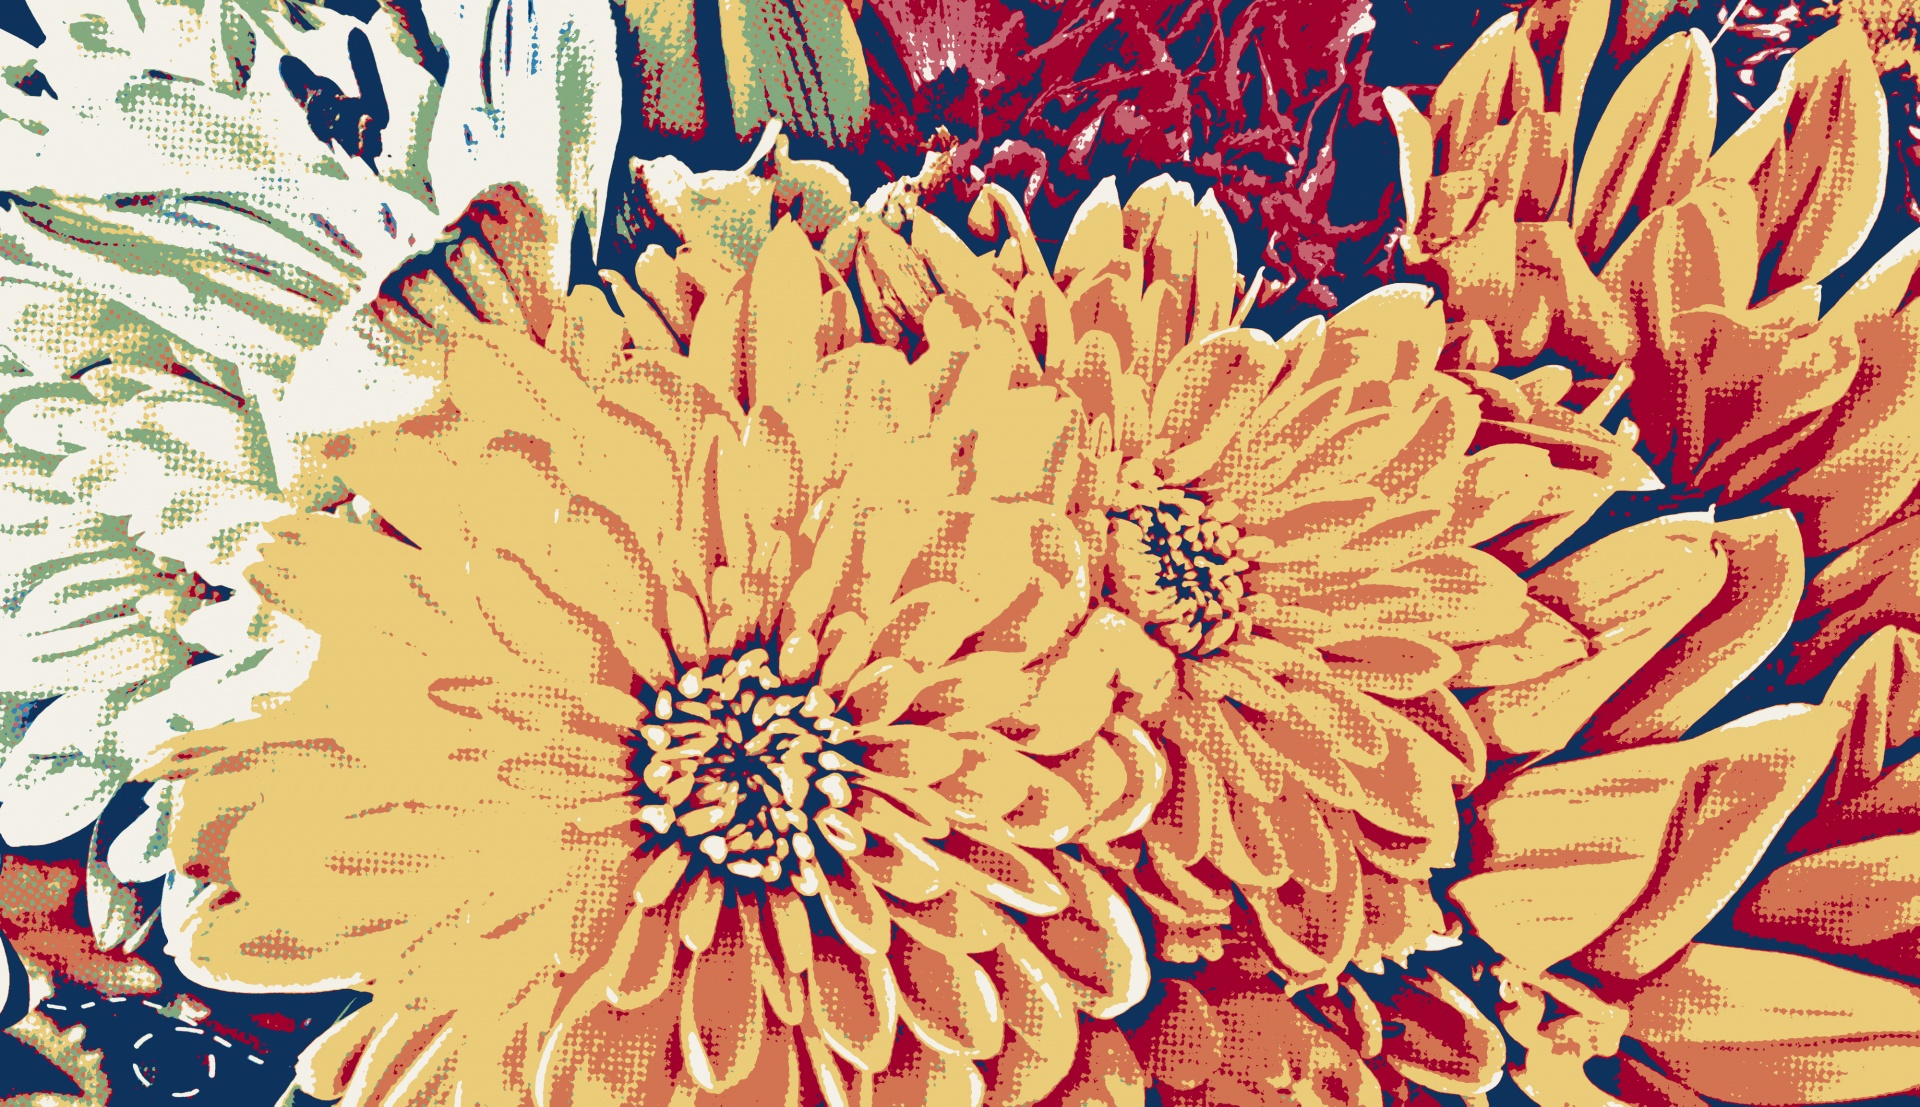 artistic effect applied to photo of yellow chrysanthemums